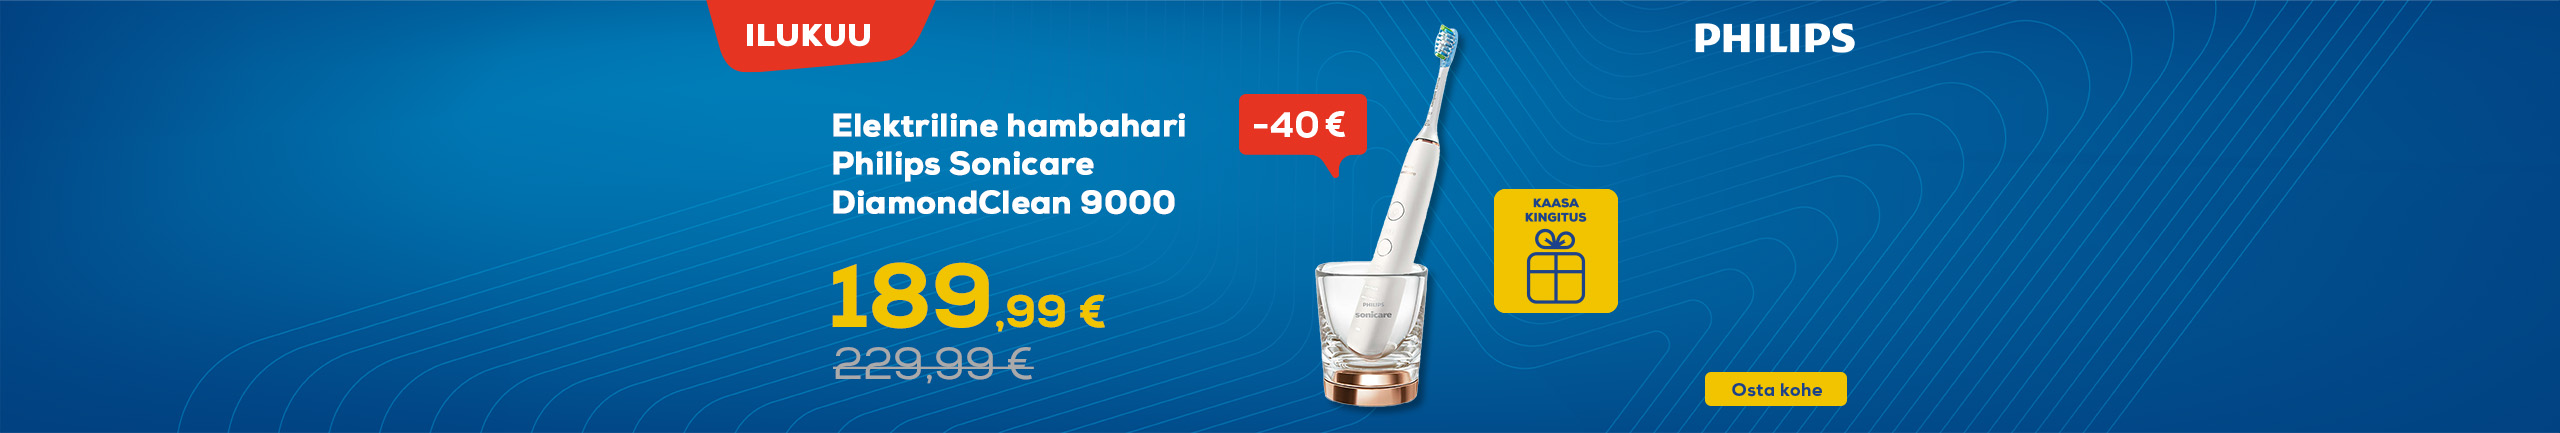 Beauty month offers - Philips Sonicare toothbrush